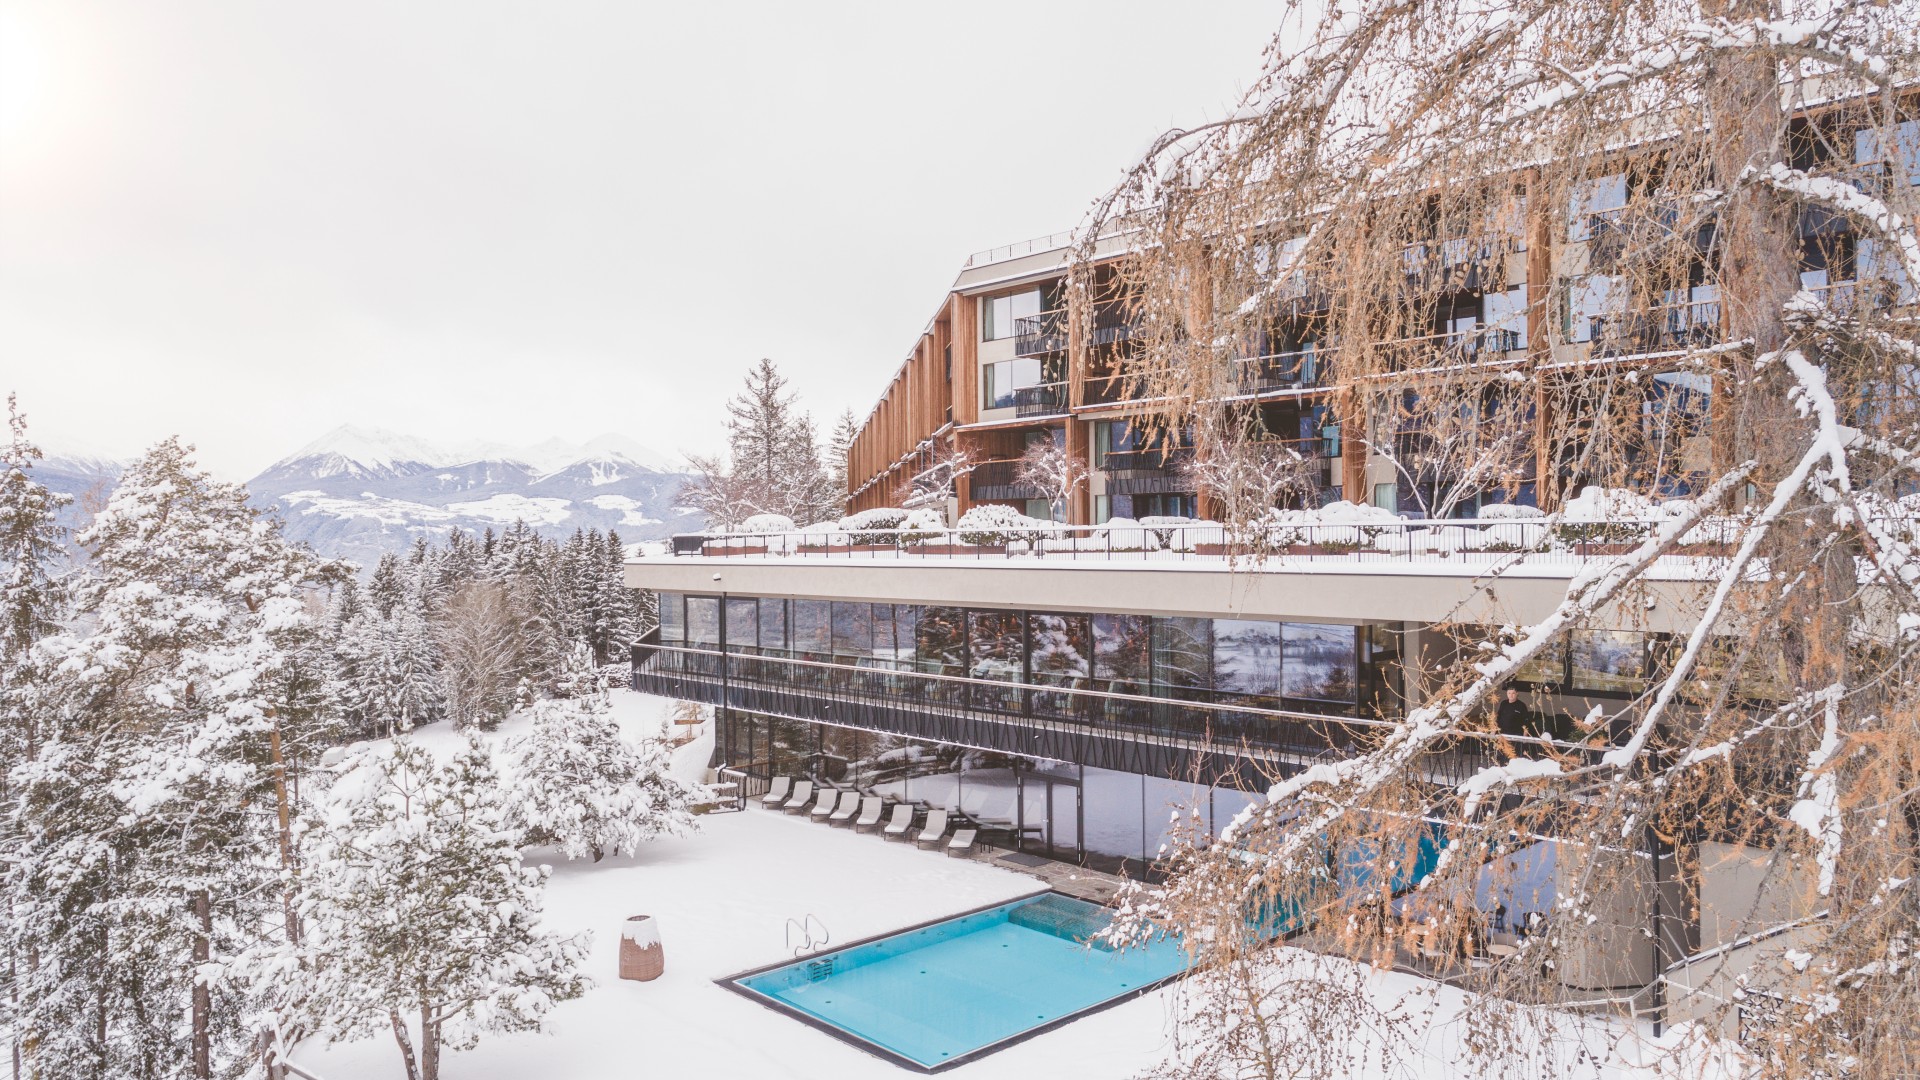 Exterior shot of the back of the My Arbor treetop hotel in the Dolomite mountains in winter snow